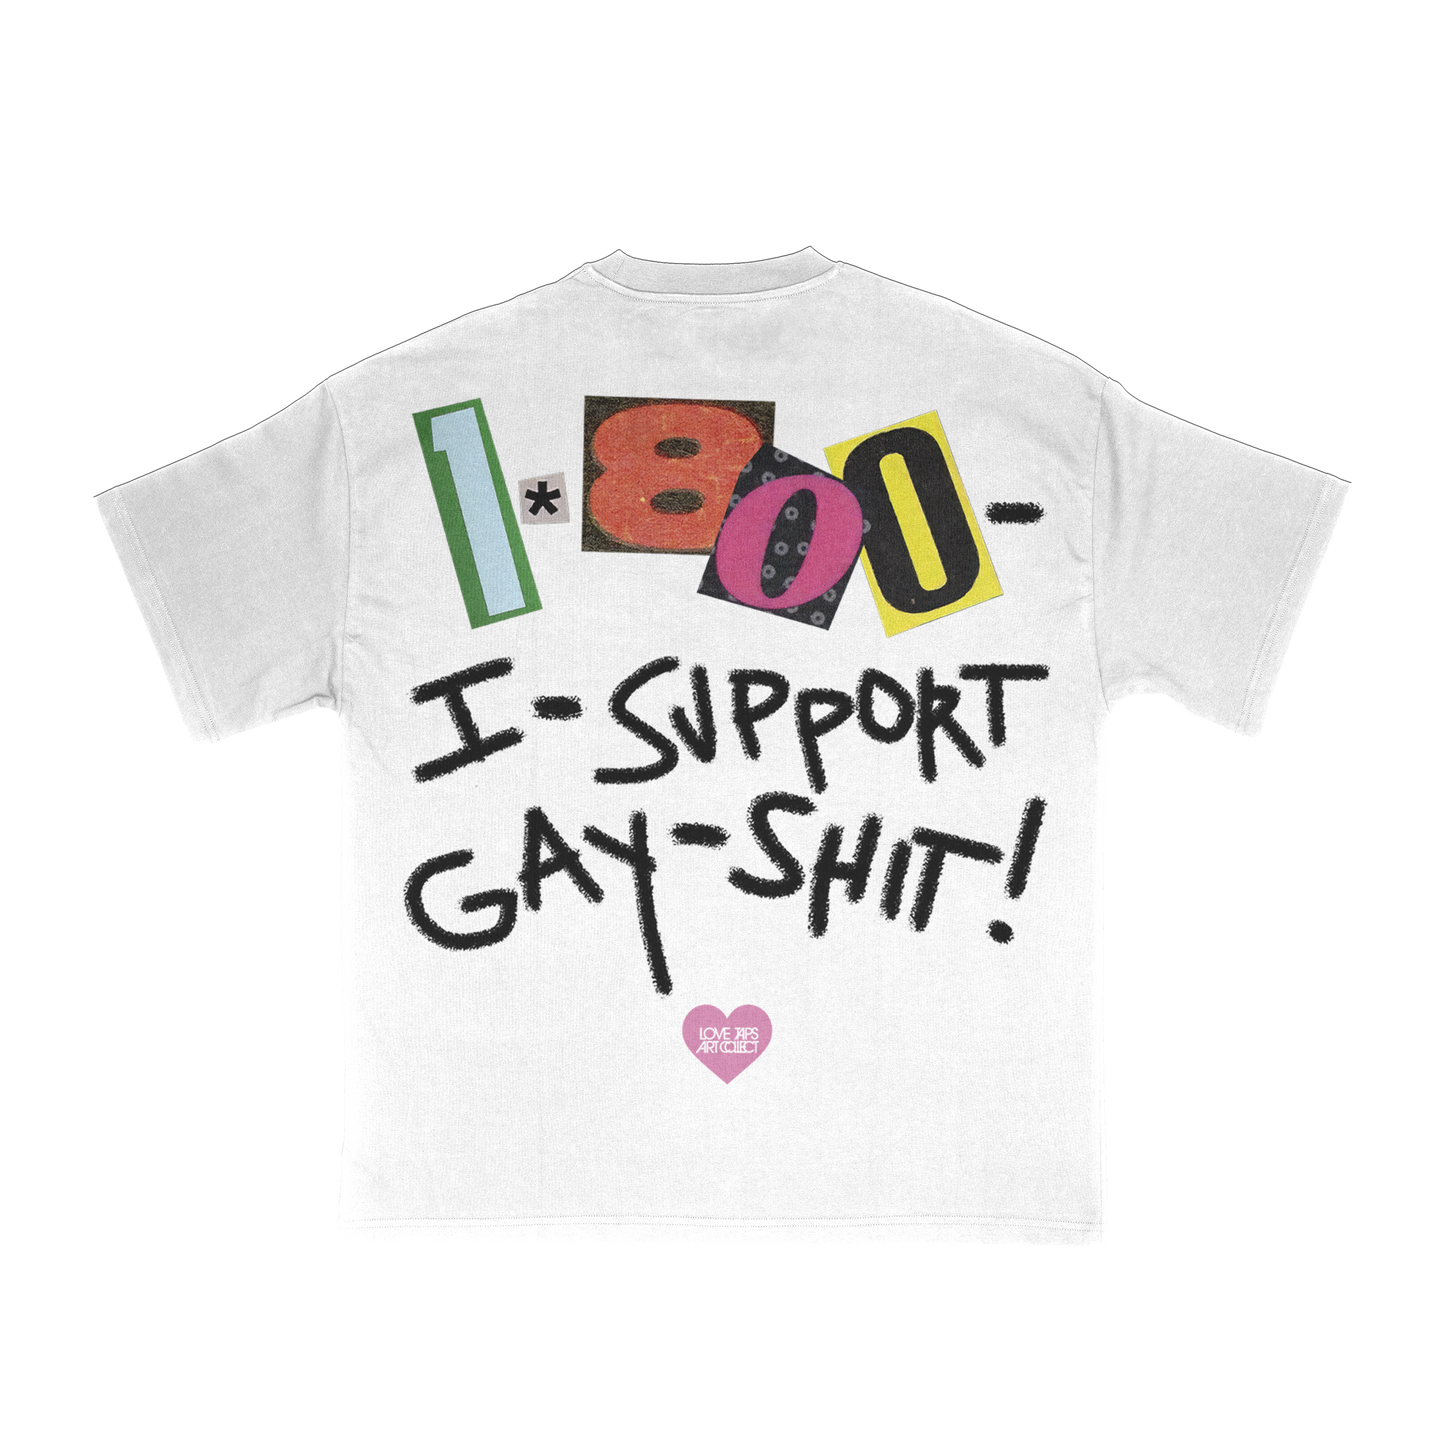 1-800-I-SUPPORT-GAY-SH*T!